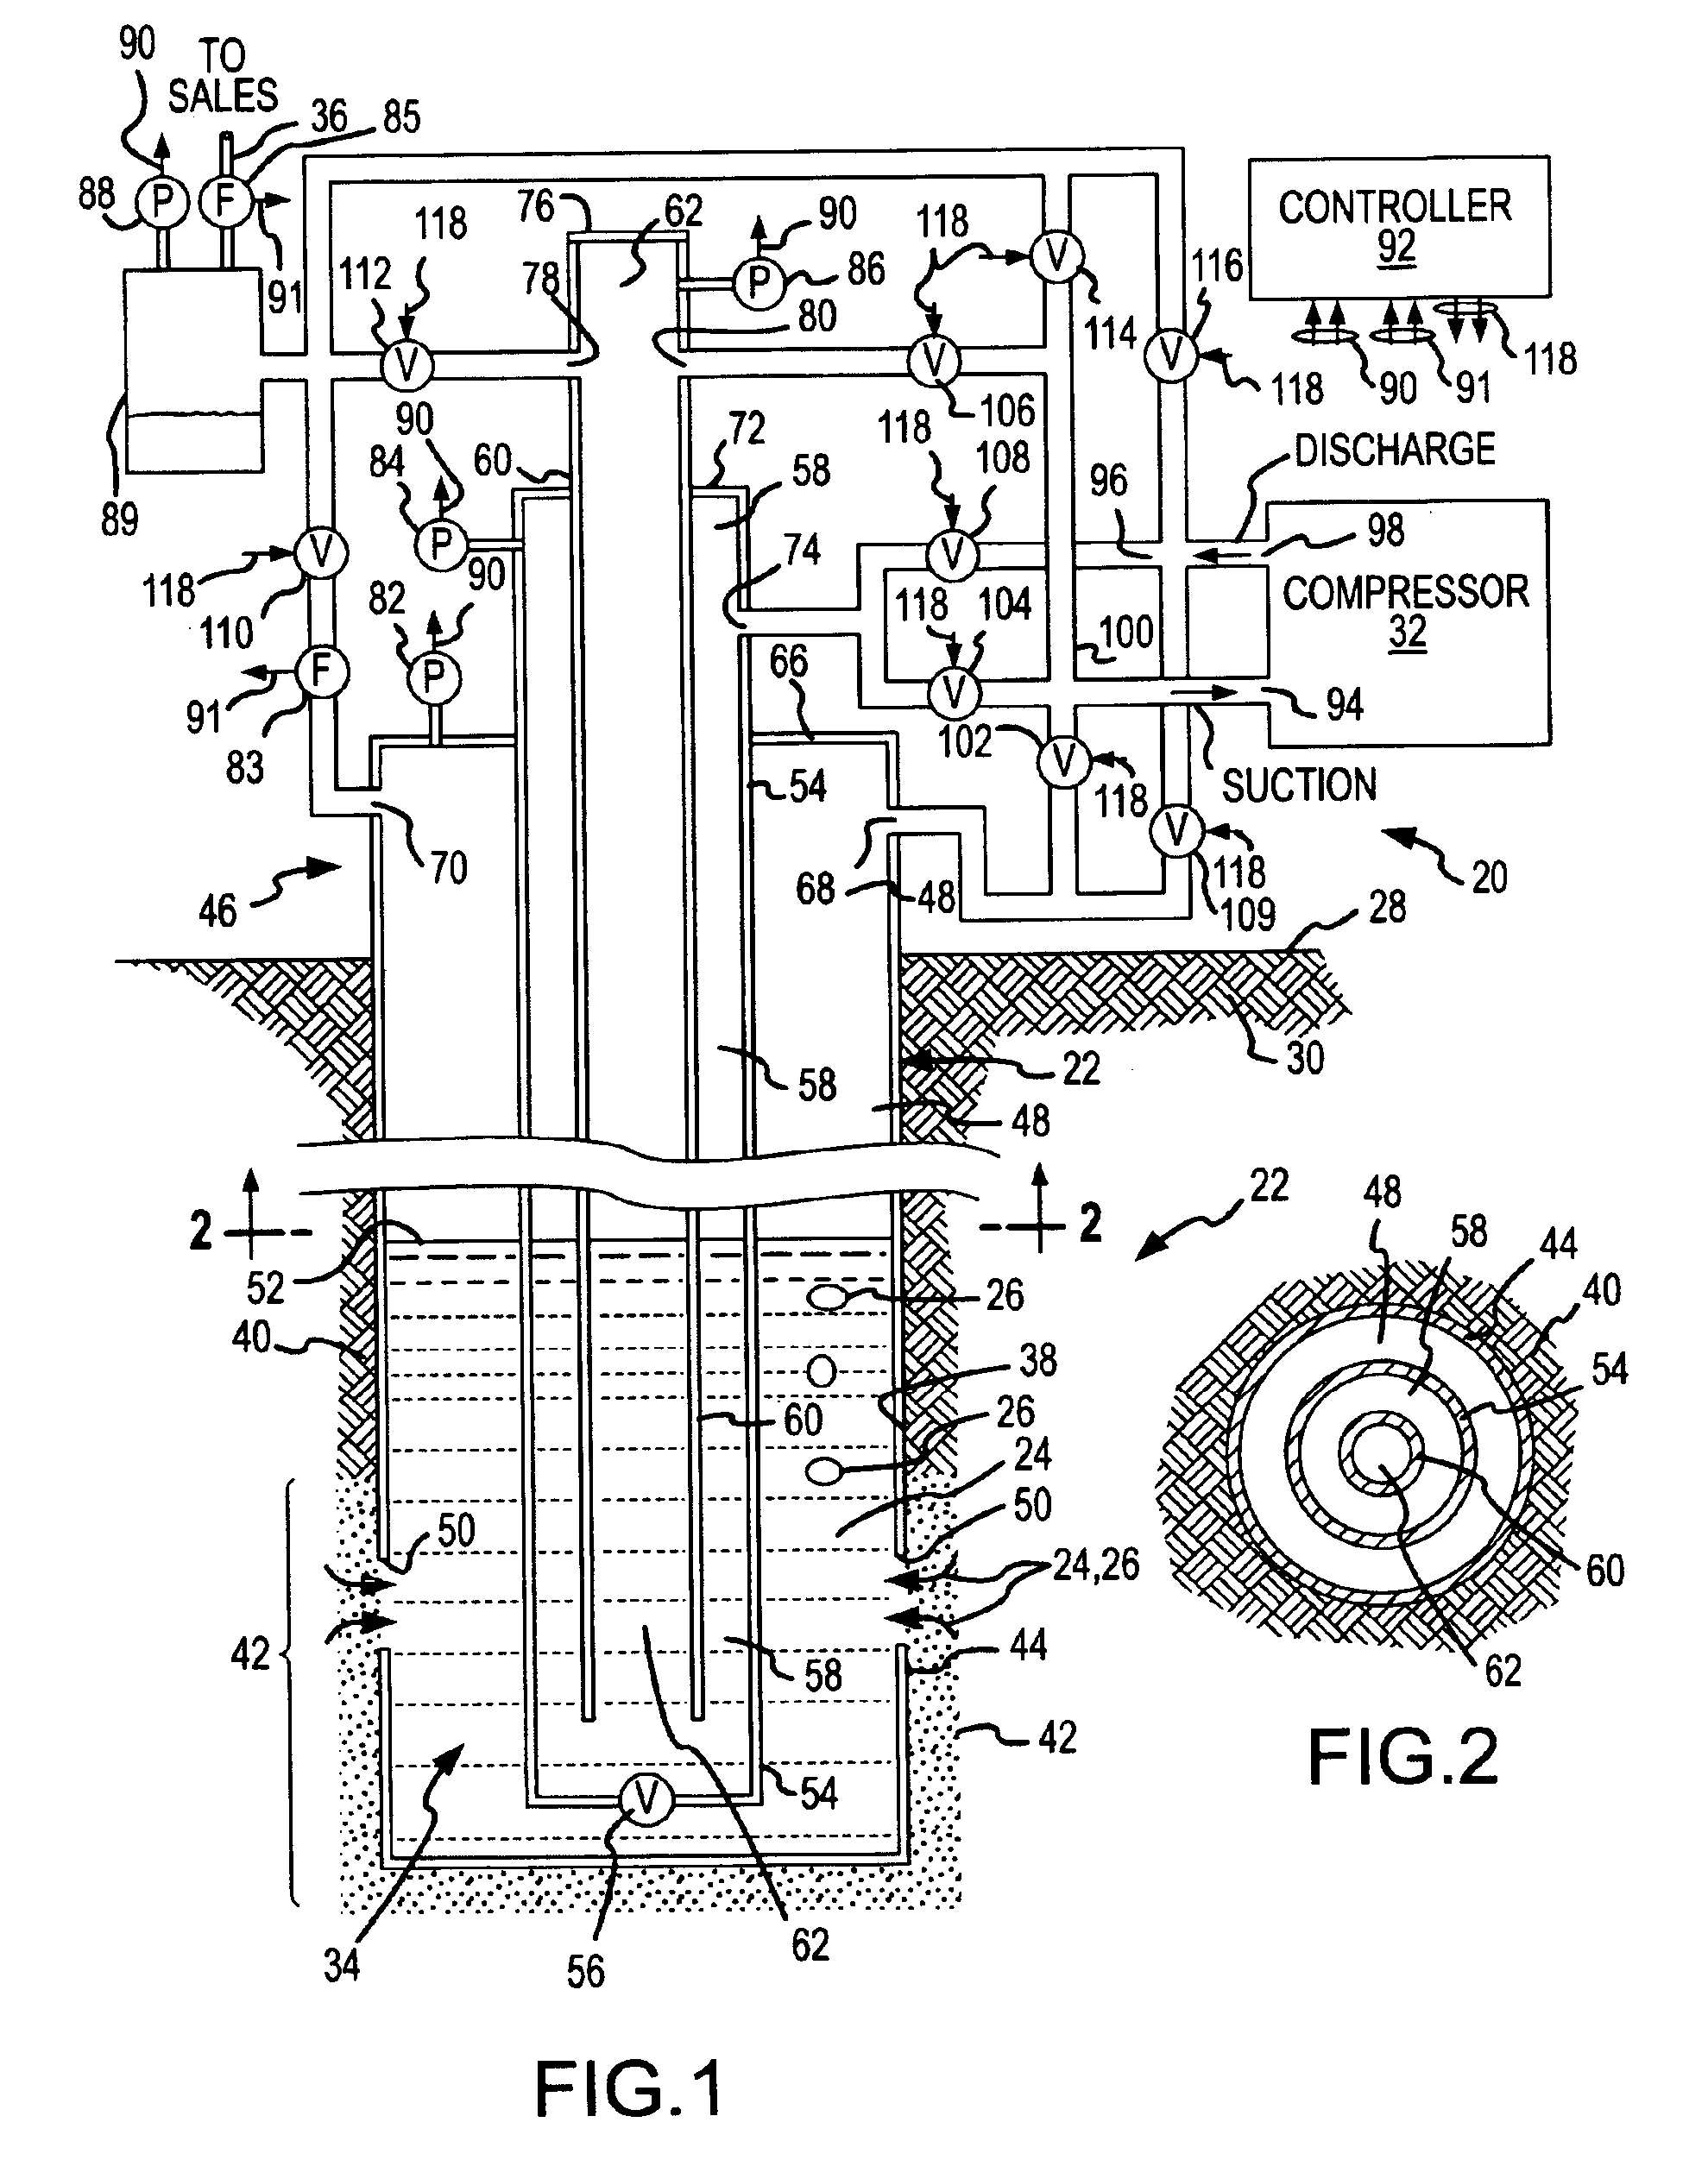 Gas recovery apparatus, method and cycle having a three chamber evacuation phase and two liquid extraction phases for improved natural gas production